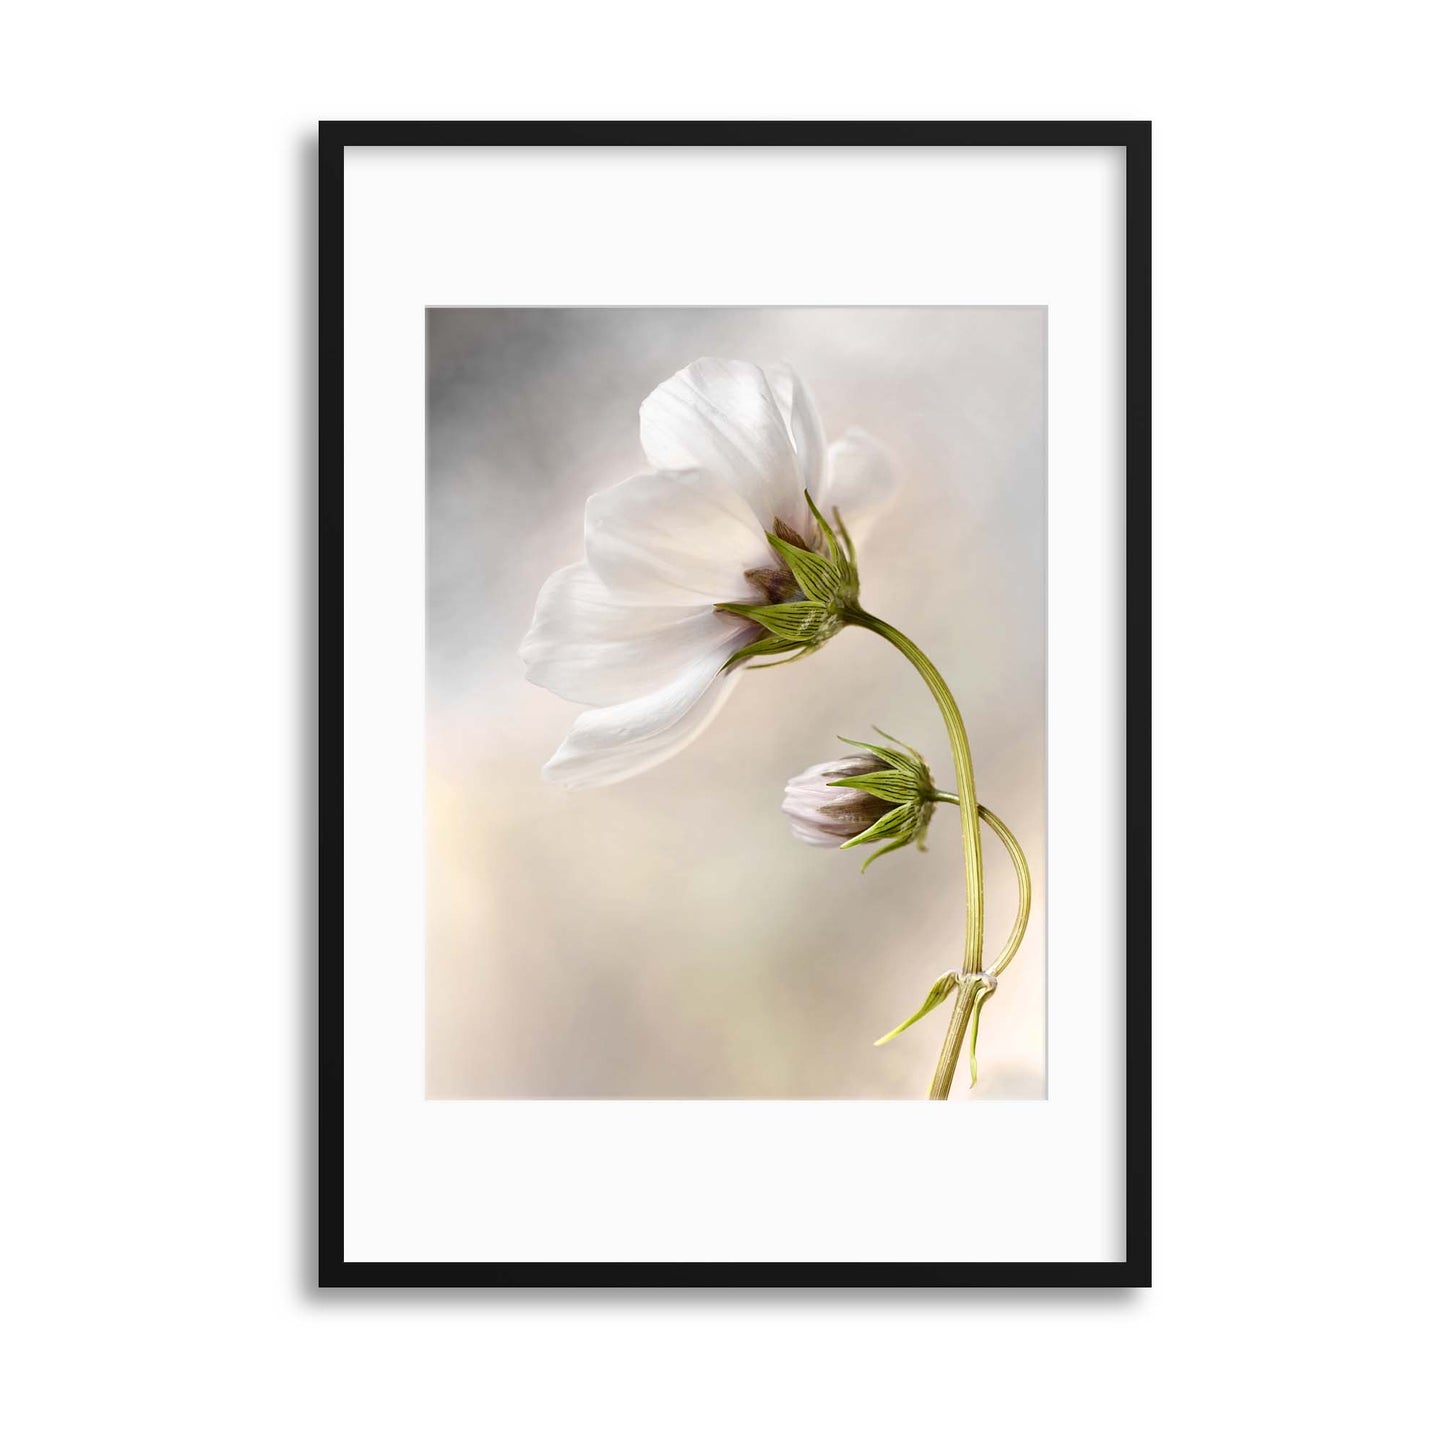 Heavenly Cosmos by Mandy Disher Framed Print - USTAD HOME